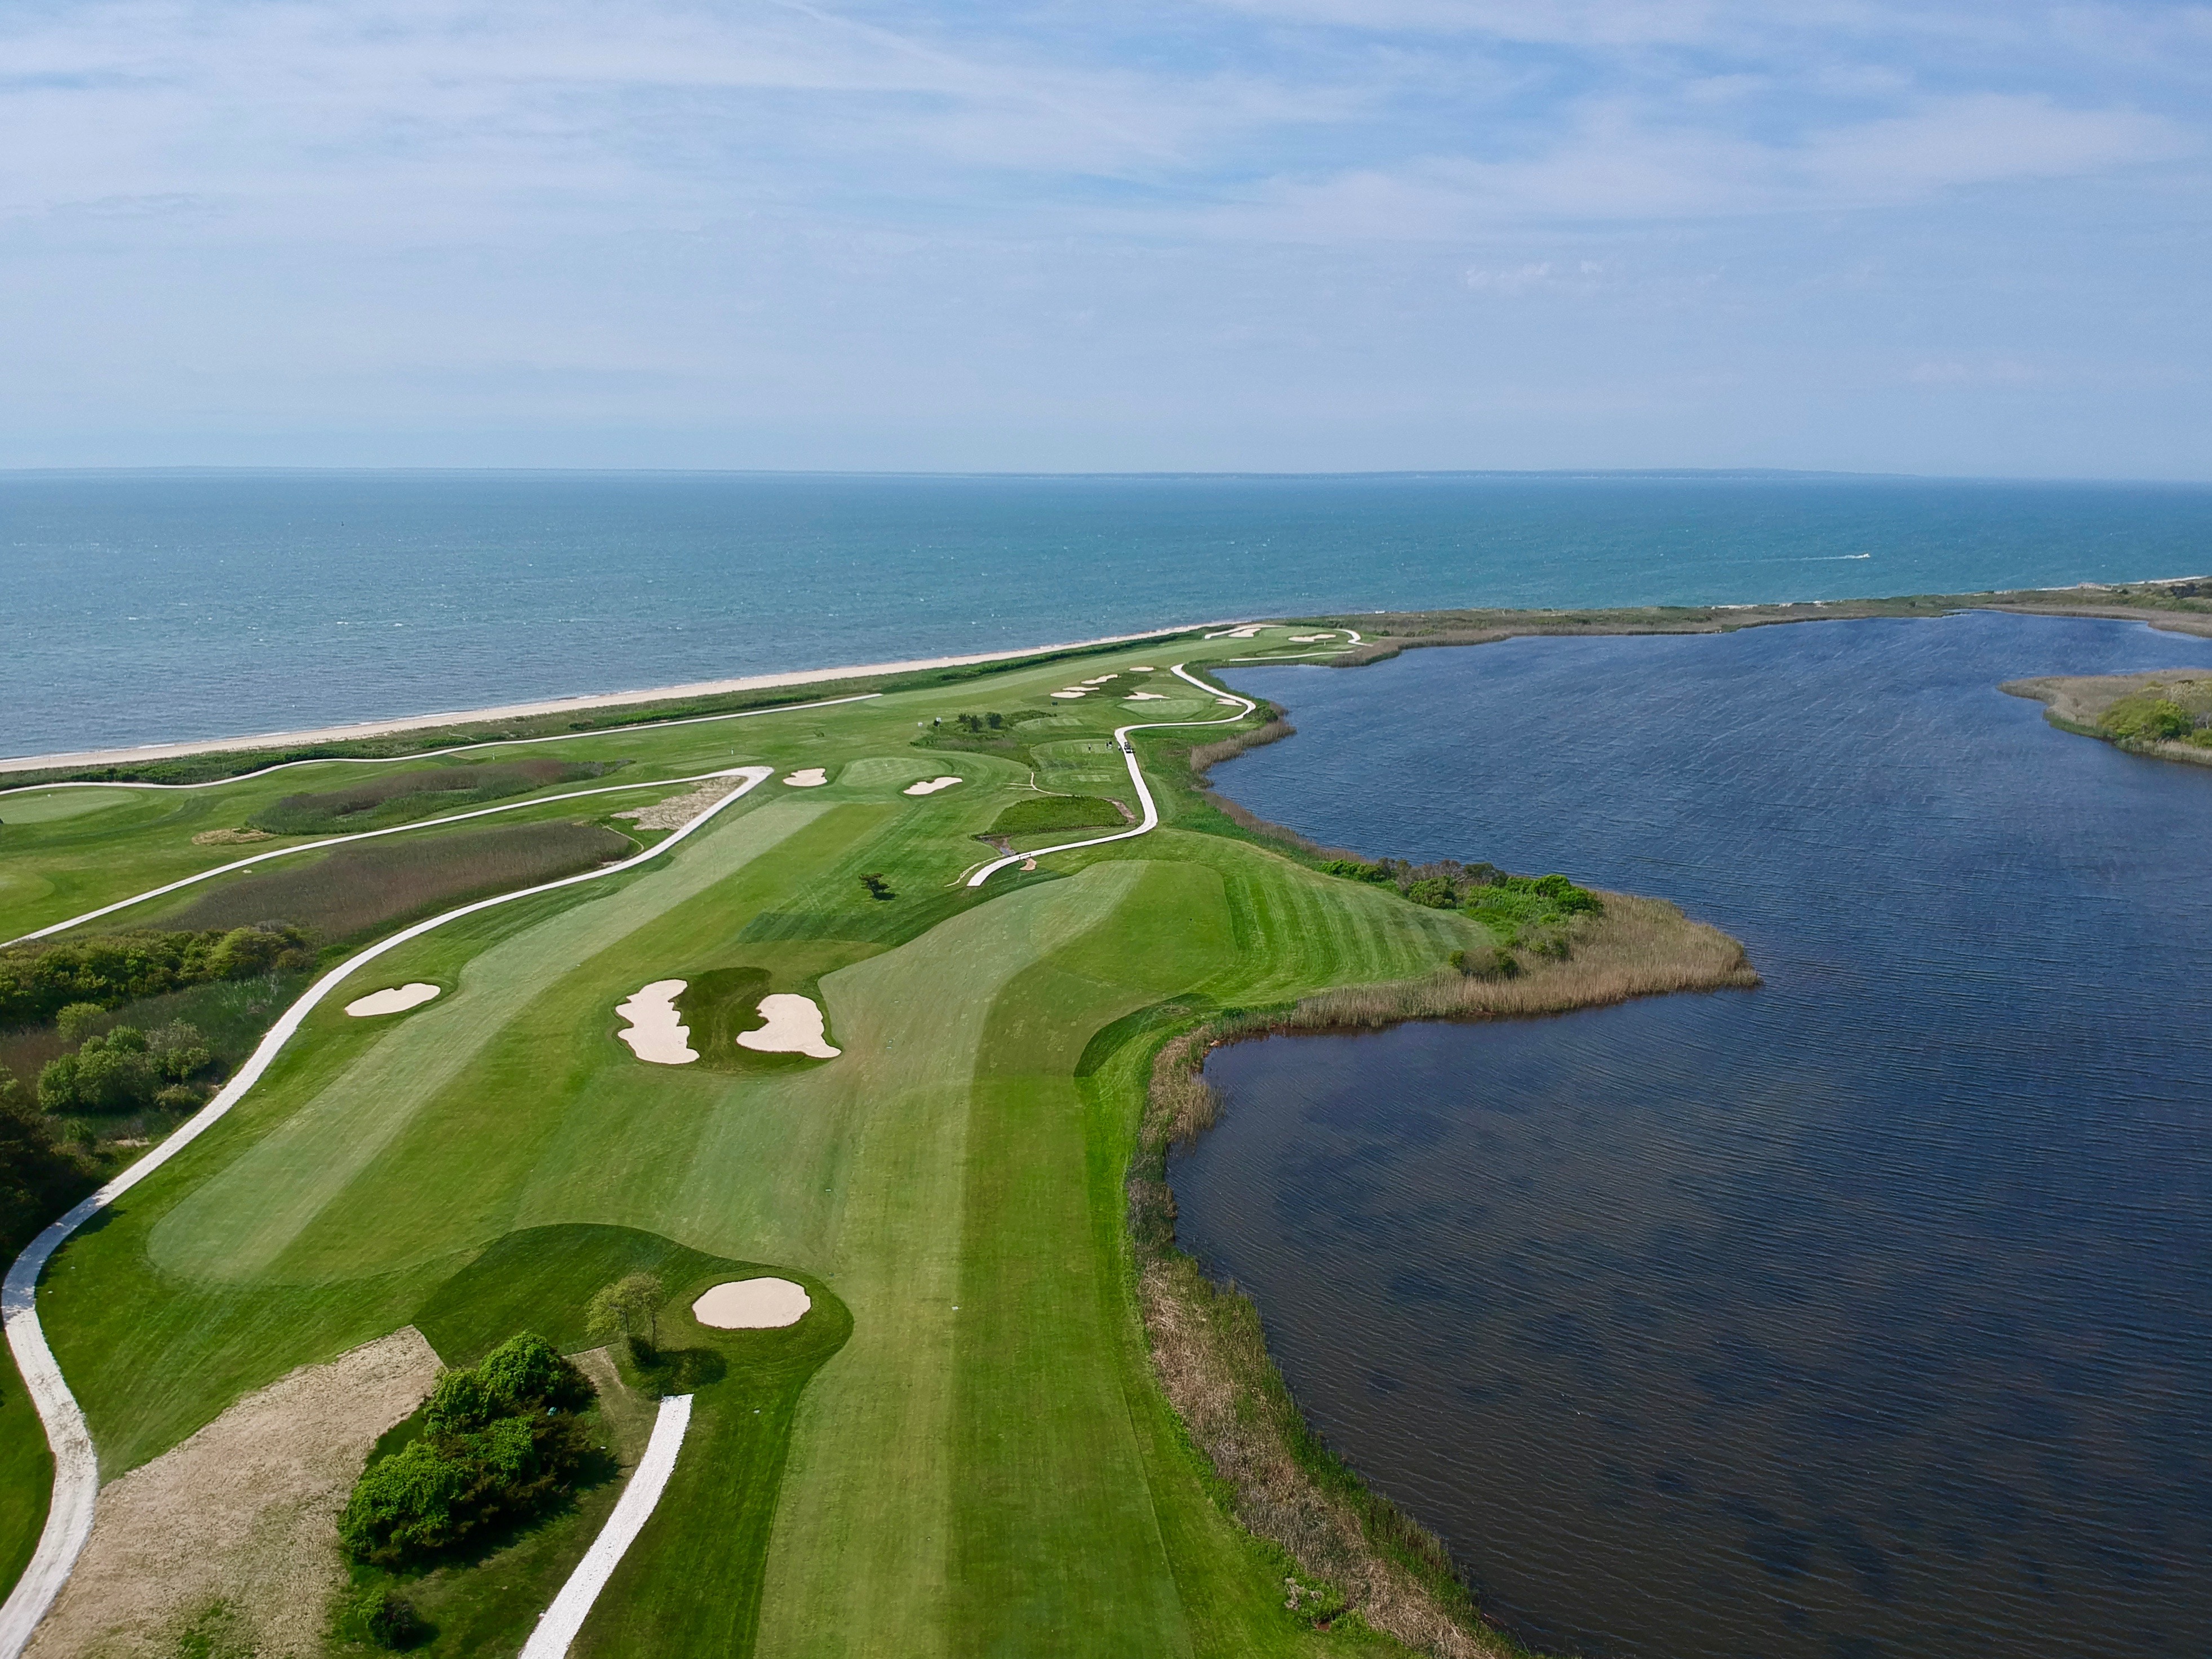 aerial view overlooks the newly renovated Ocean Course’s holes # 5 and #6